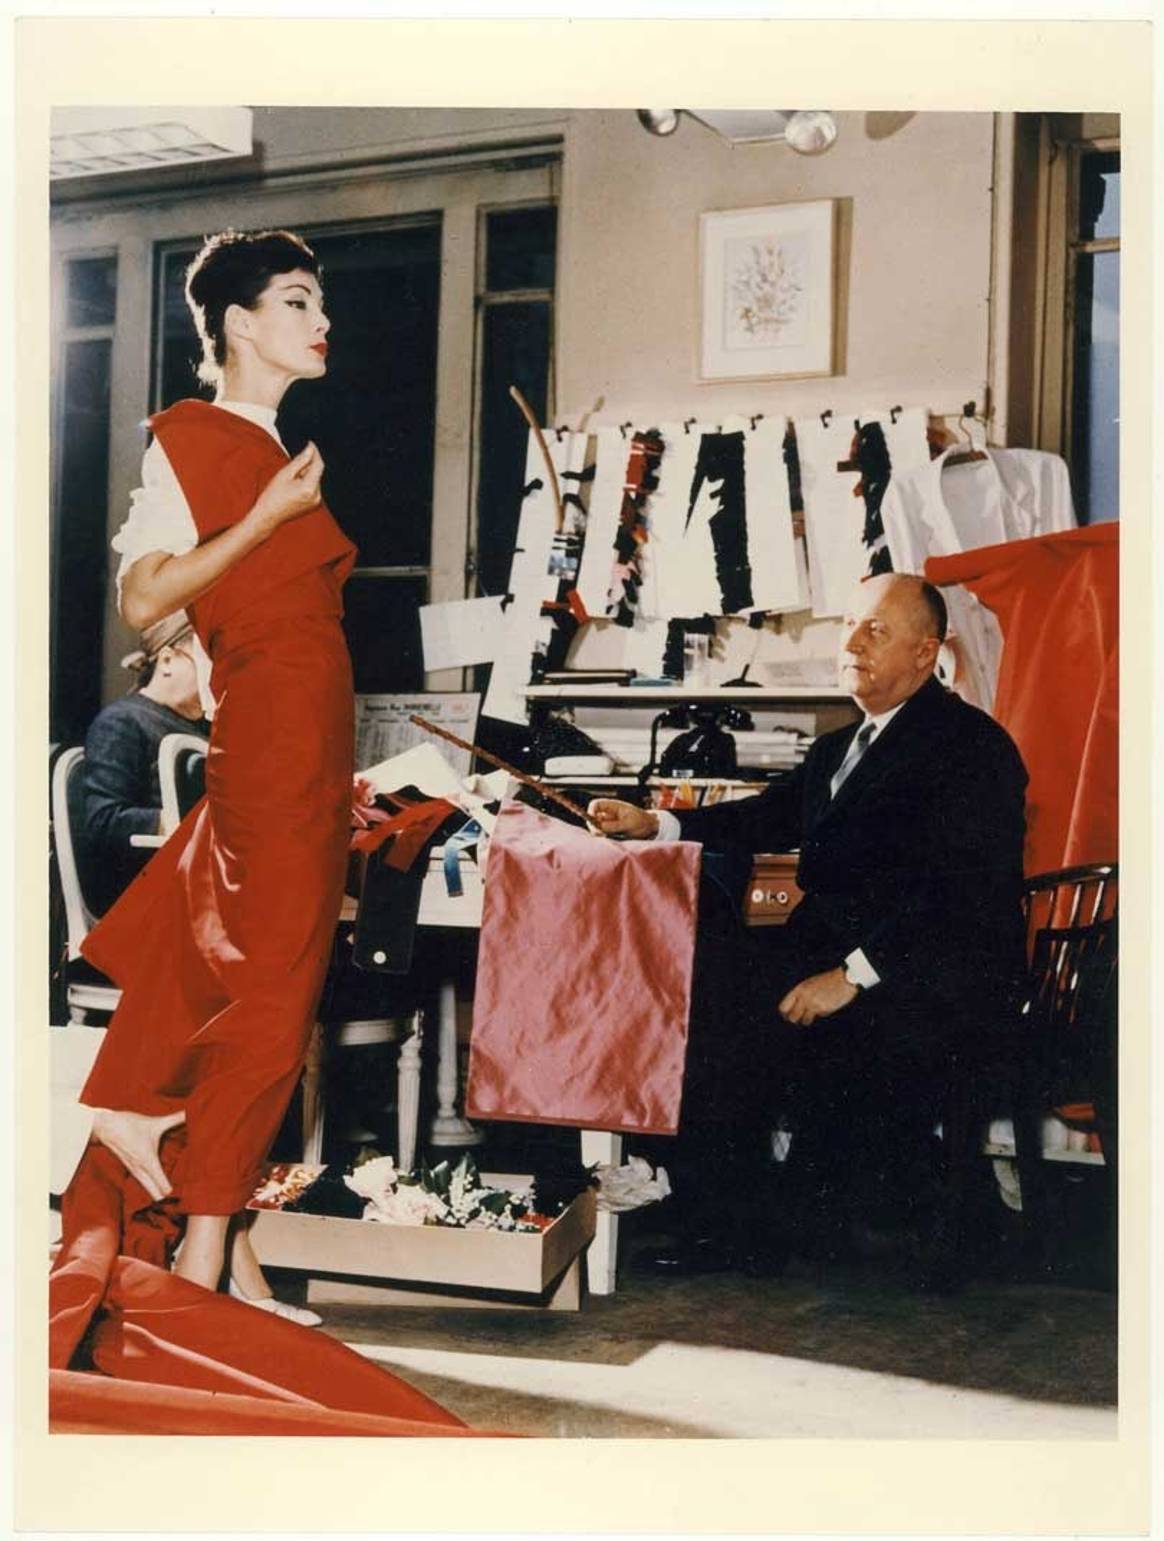 London's V&A Museum to stage 'reimagined' hit Dior expo